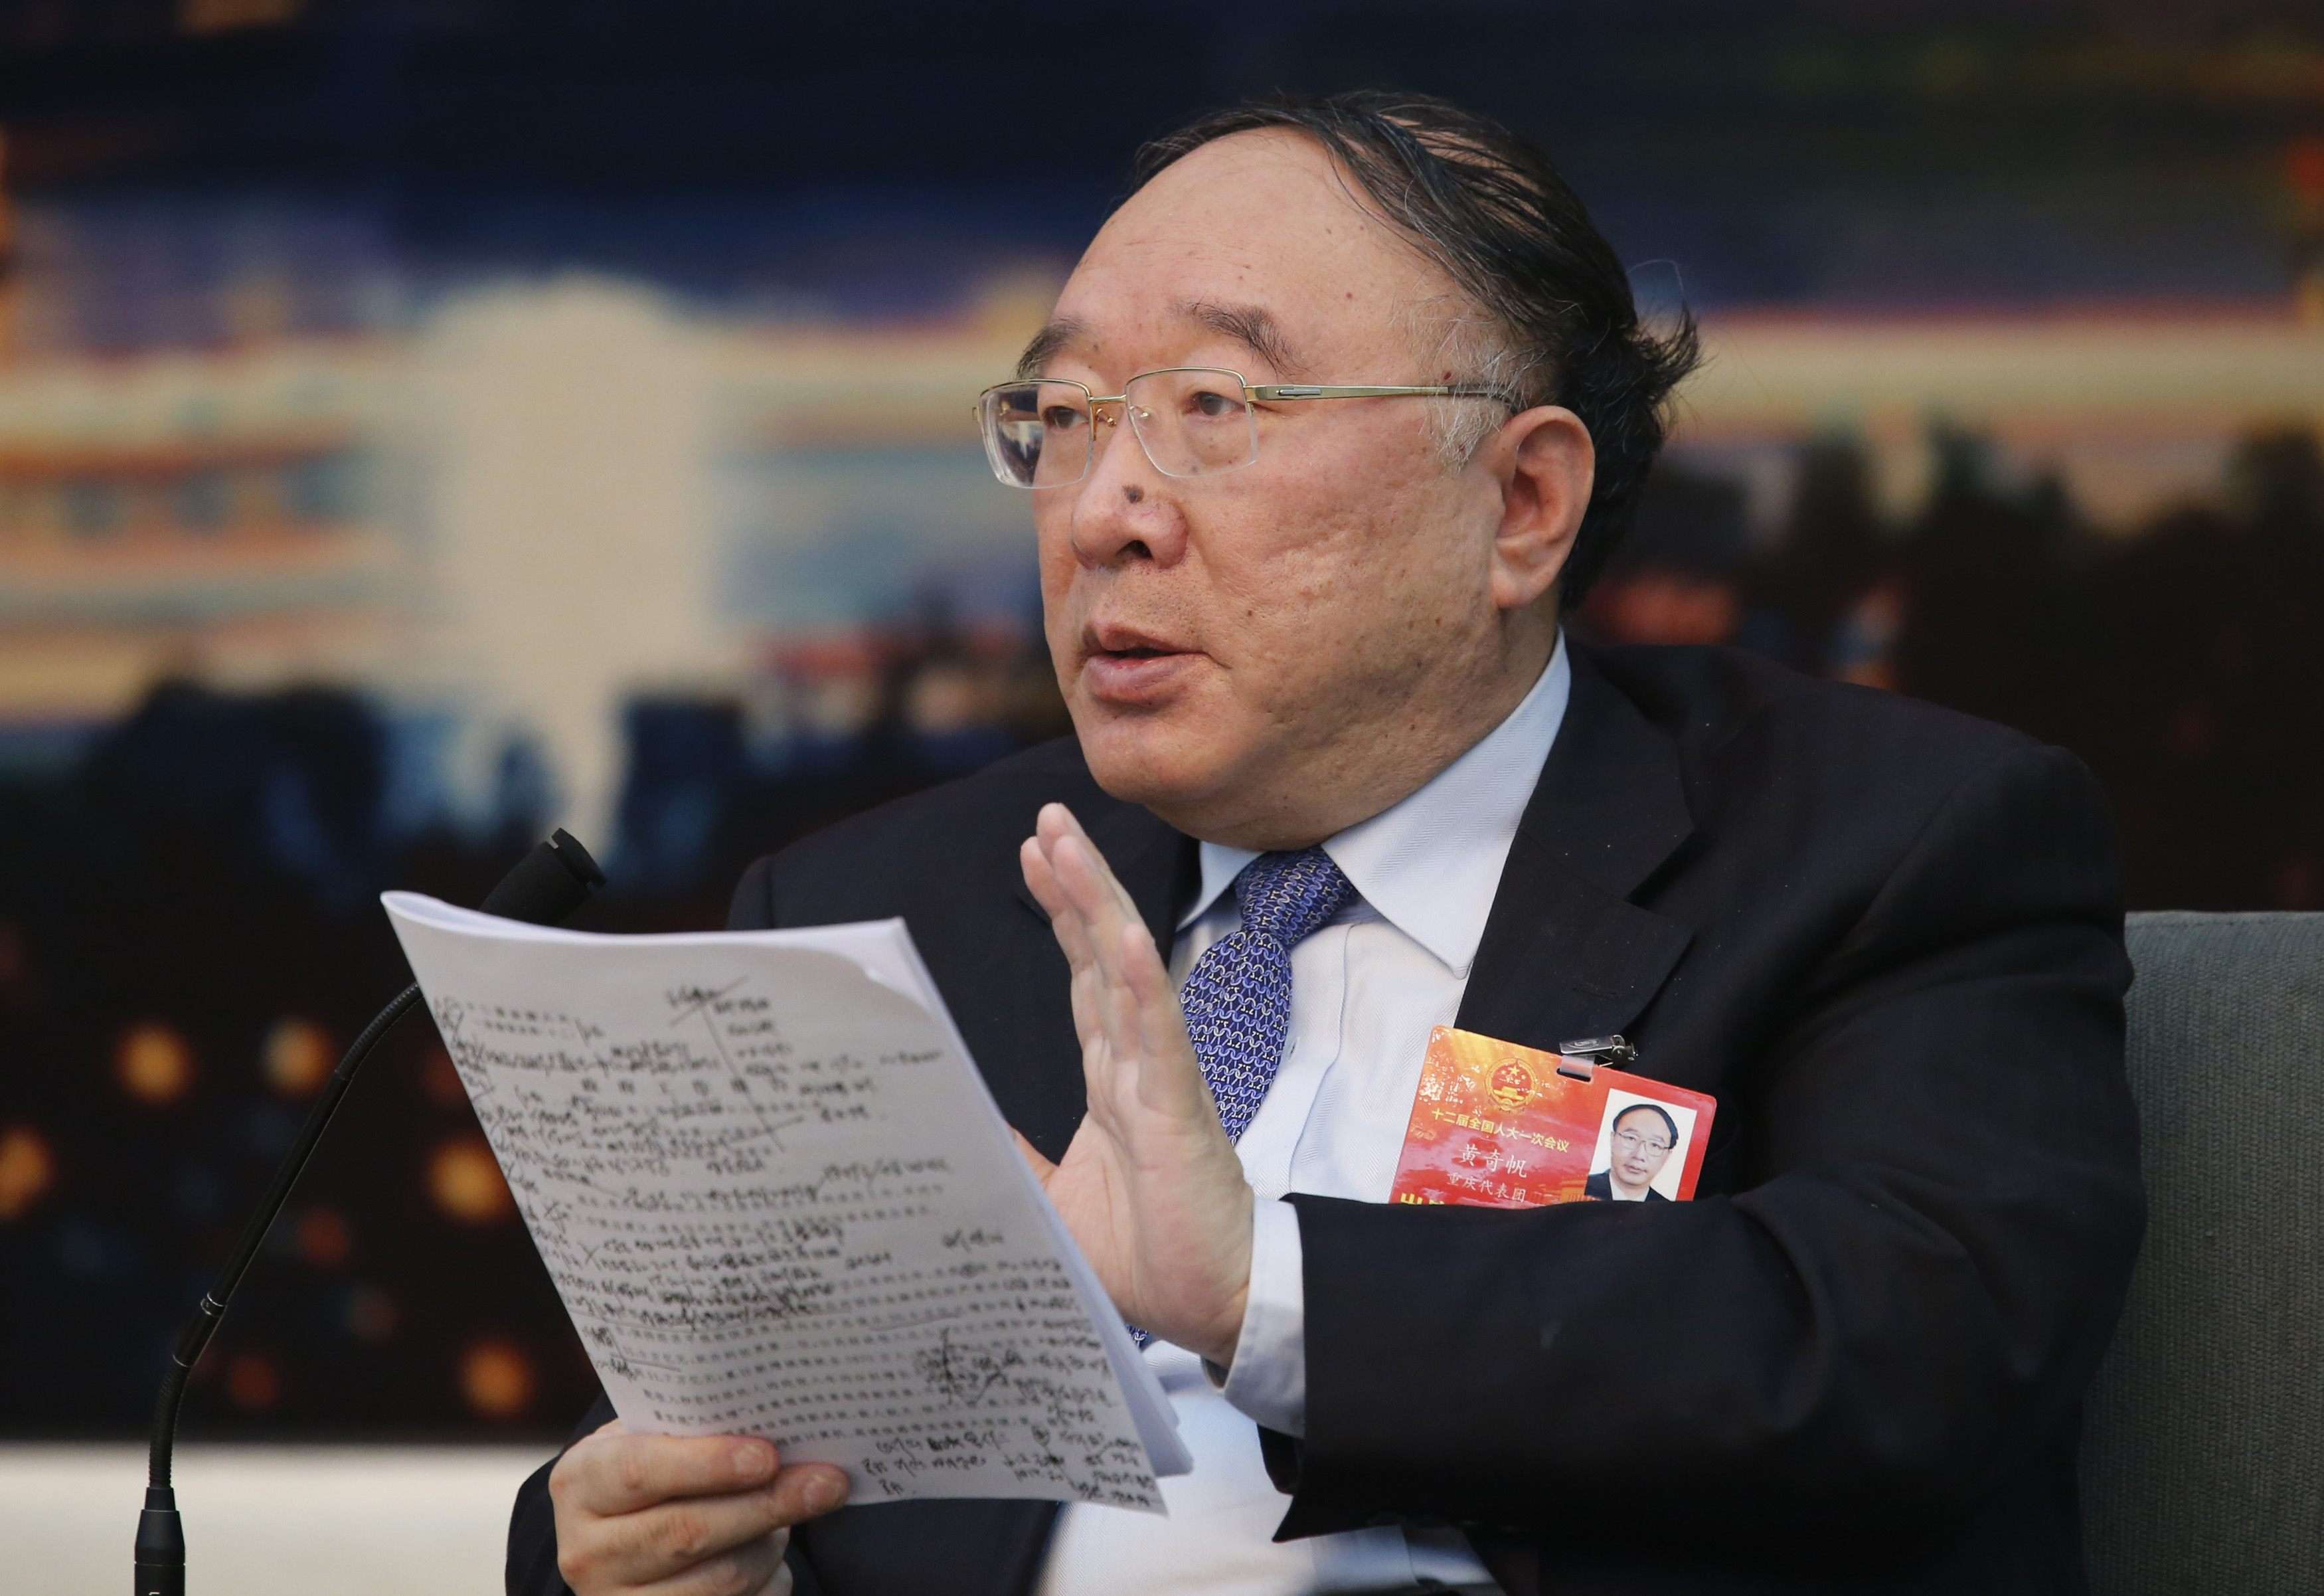 Huang Qifan’s major achievements in Chongqing included developing an electronics industry to cut its reliance on coal and steel,. Photo: Reuters